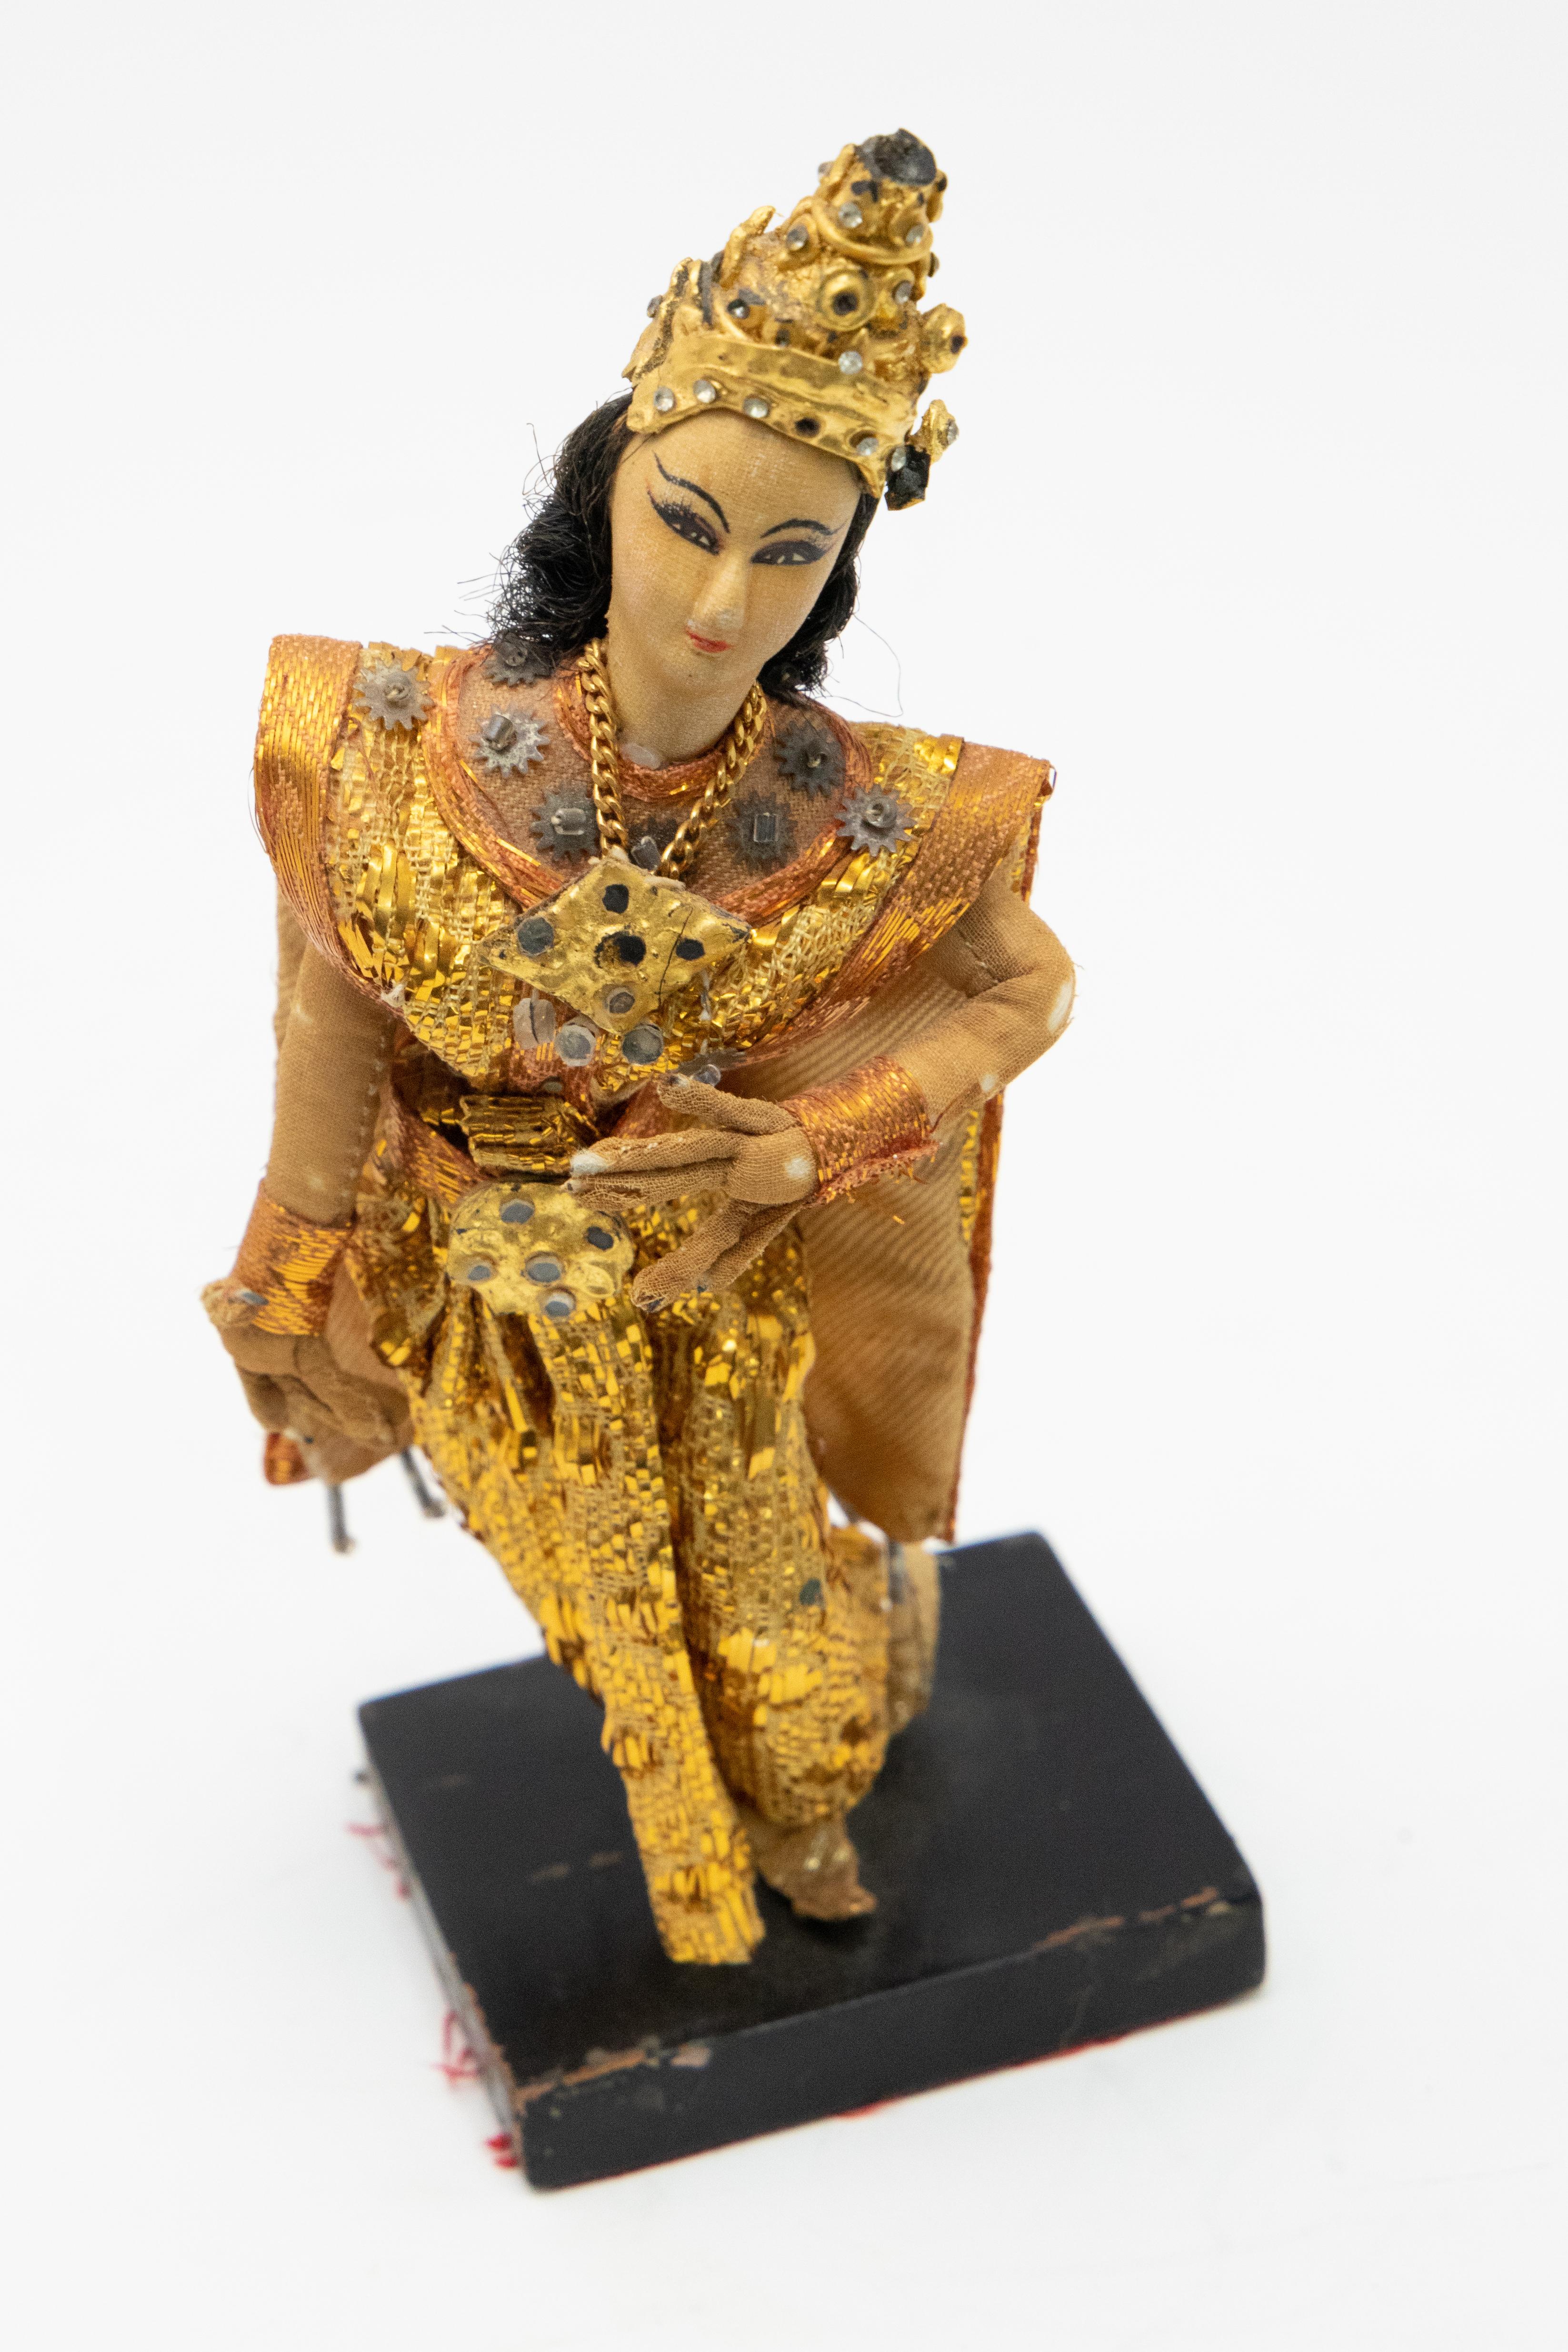 Beautiful Hindu goddess doll all handmade. Wearing gorgeous robes with golds and coppers and a head piece. She stands on a wooden base.